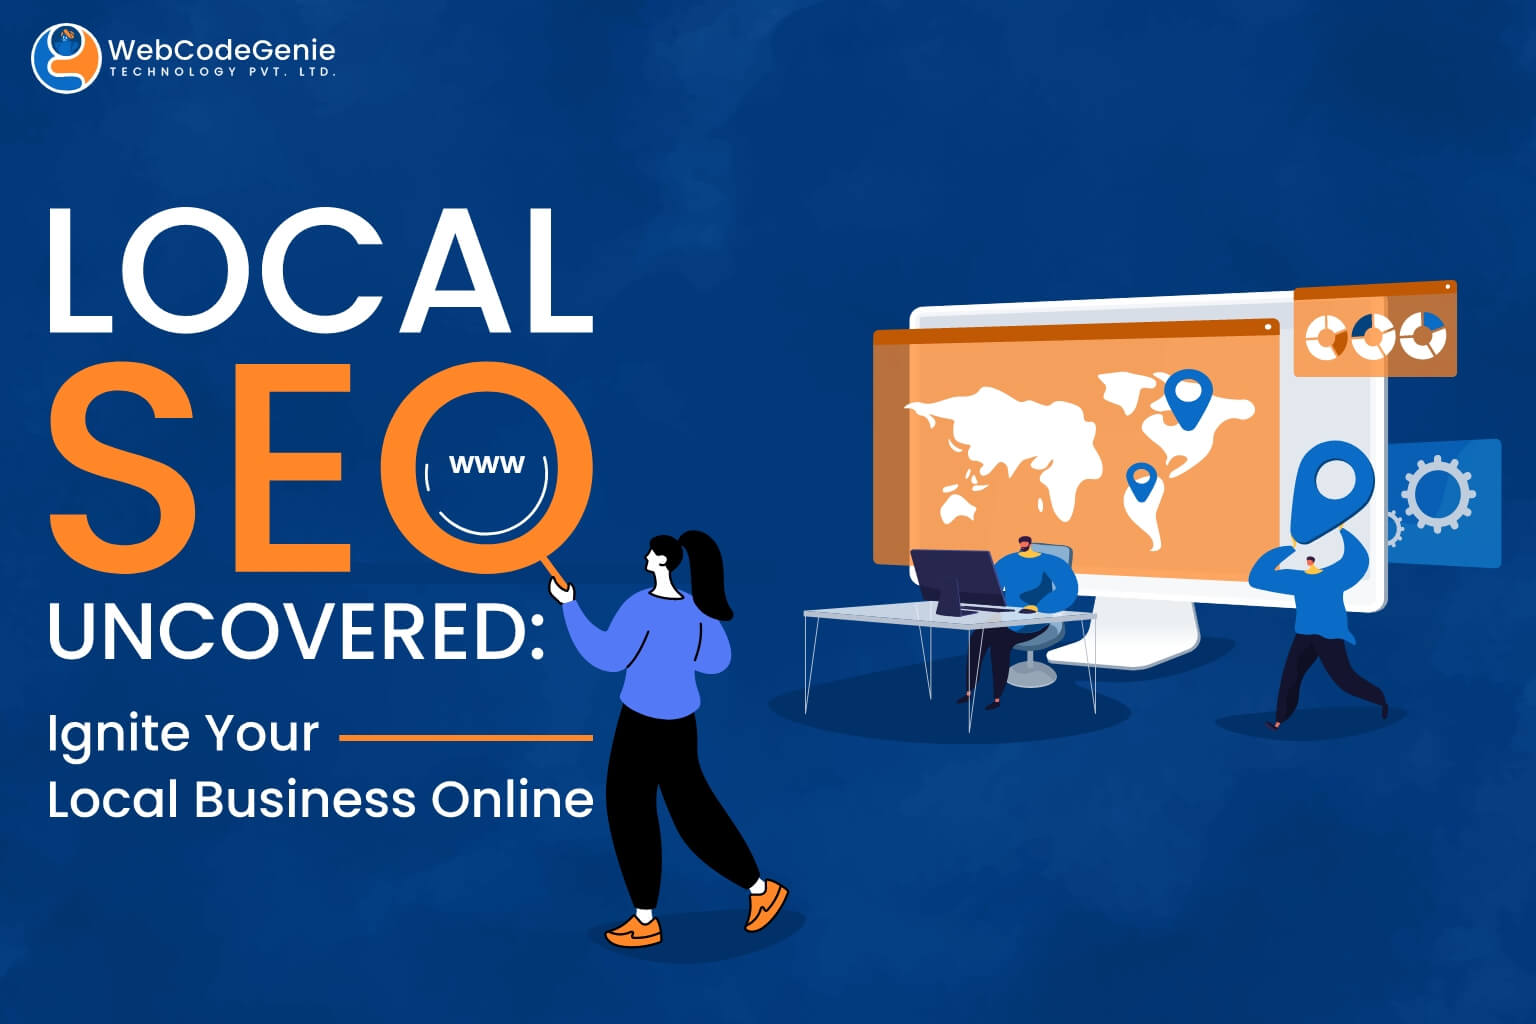 Local SEO Uncovered Ignite Your Local Business Online